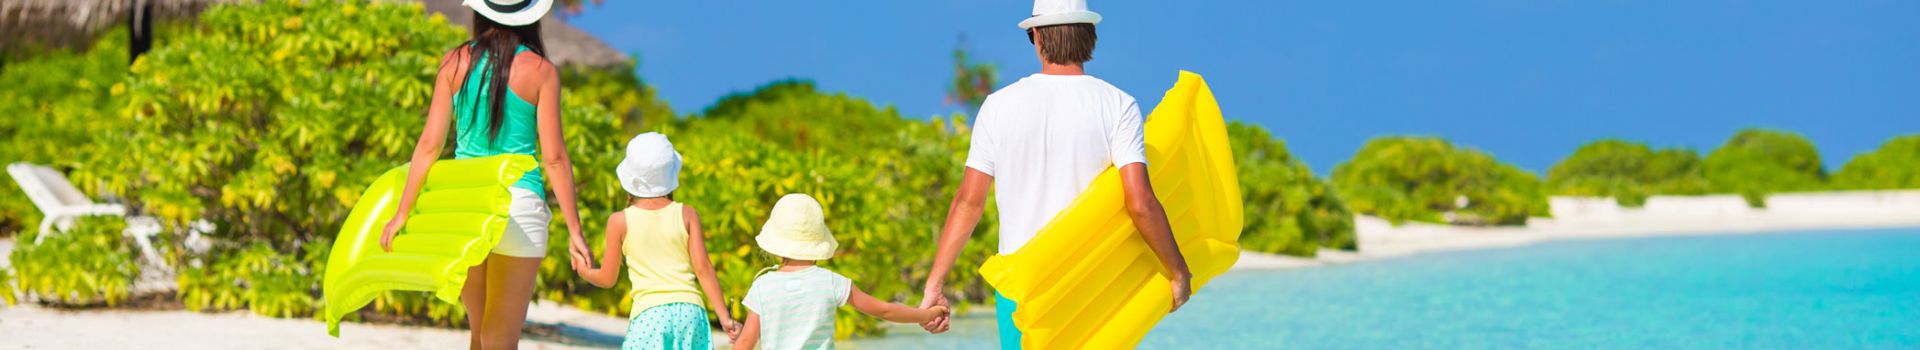 Find Last Minute Family Holiday Deals with Cassidy Travel